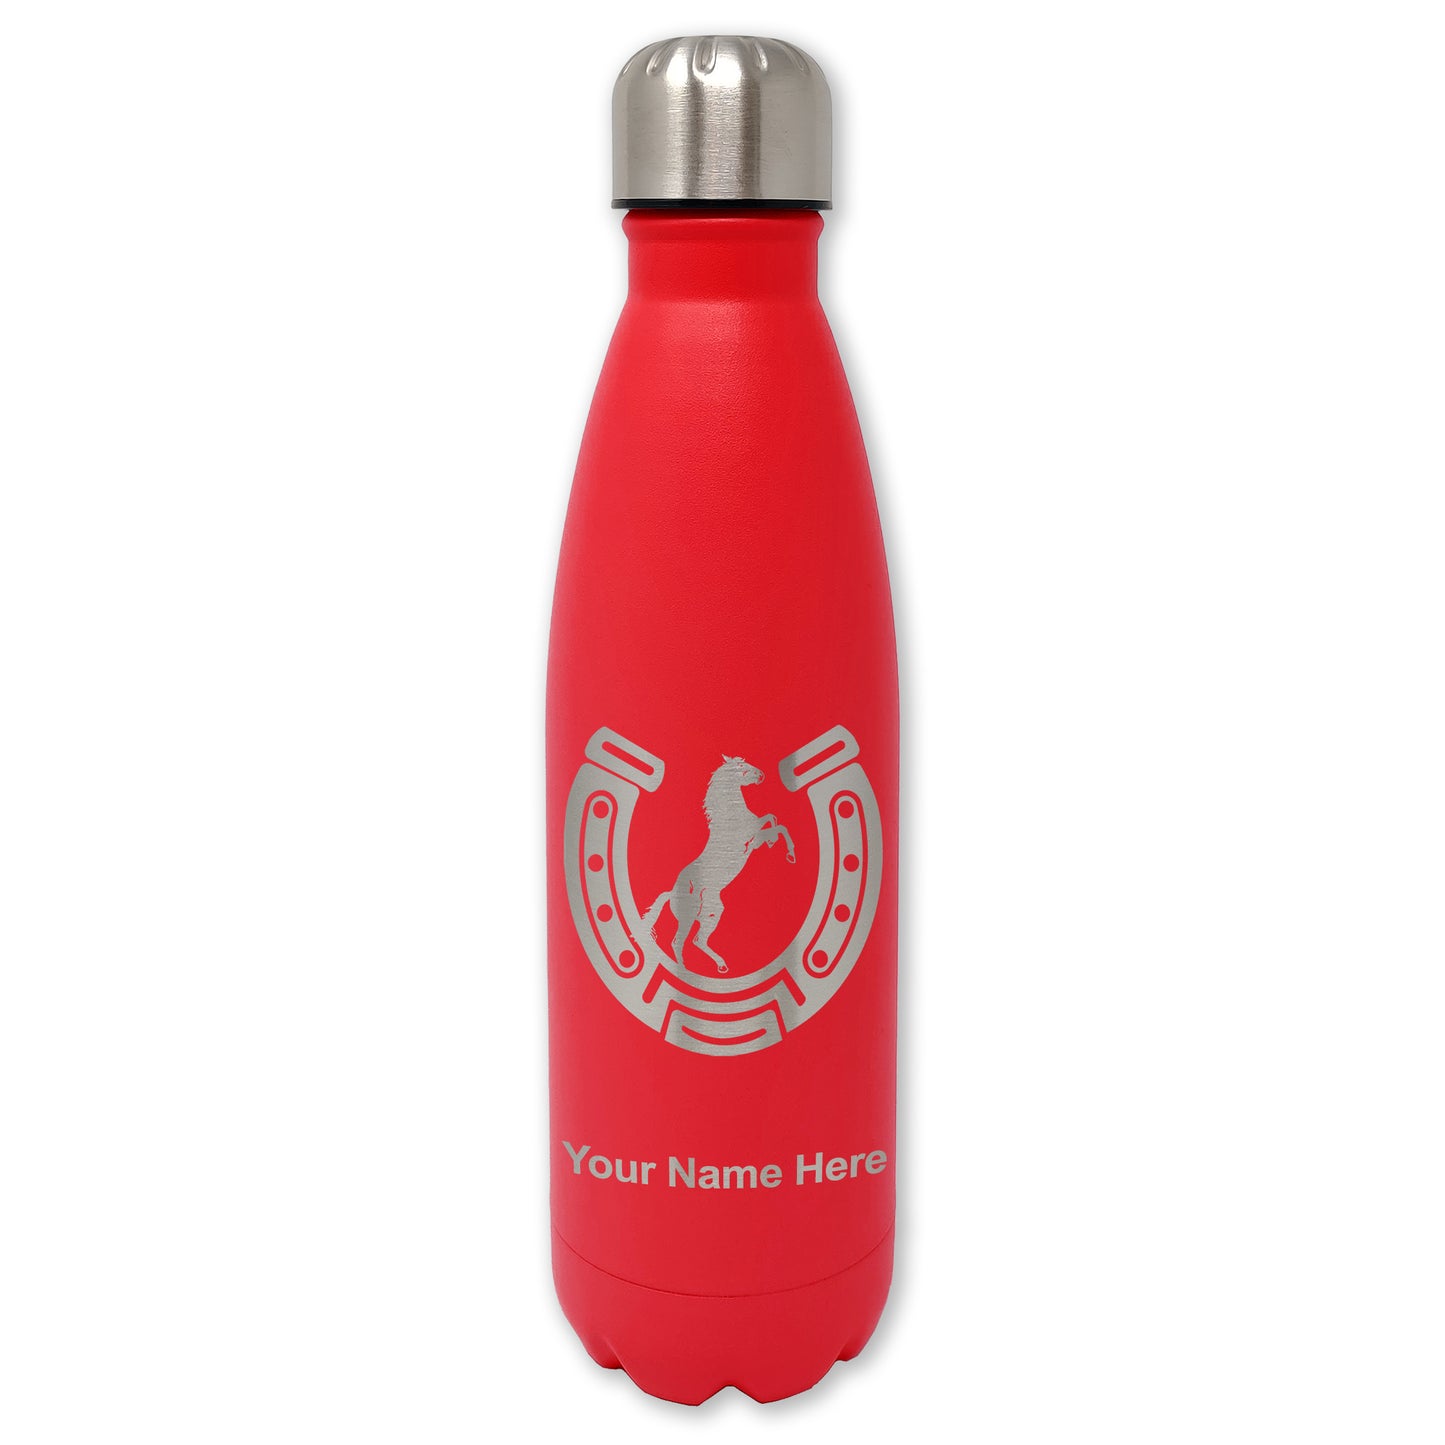 LaserGram Double Wall Water Bottle, Horseshoe with Horse, Personalized Engraving Included